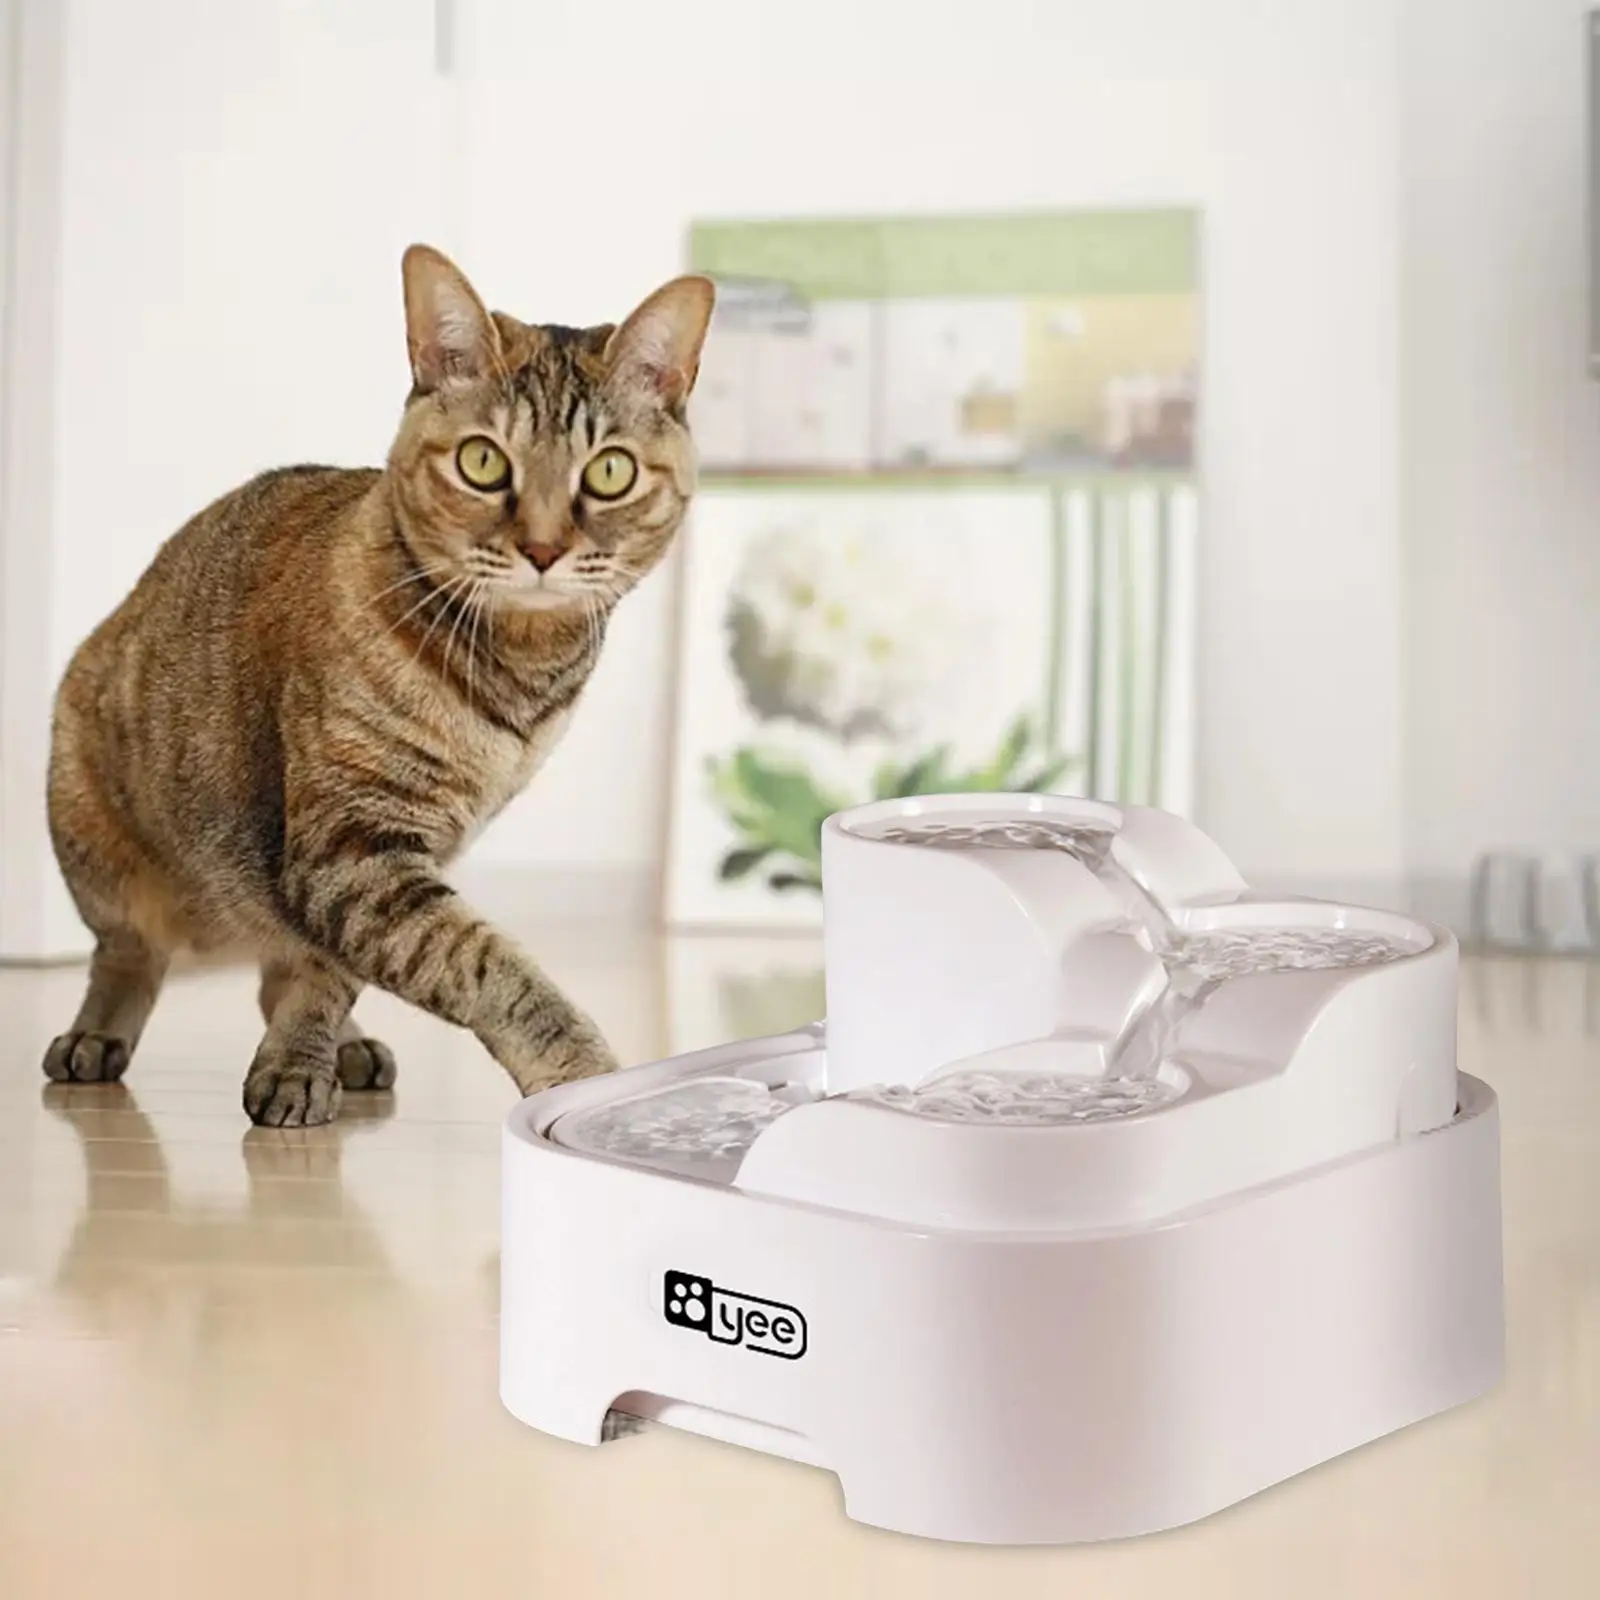 Automatic Cat Water Fountain Water Dispenser Quiet Waterer Portable USB Drinking Water Bowl for Dog Puppy Kitten Home